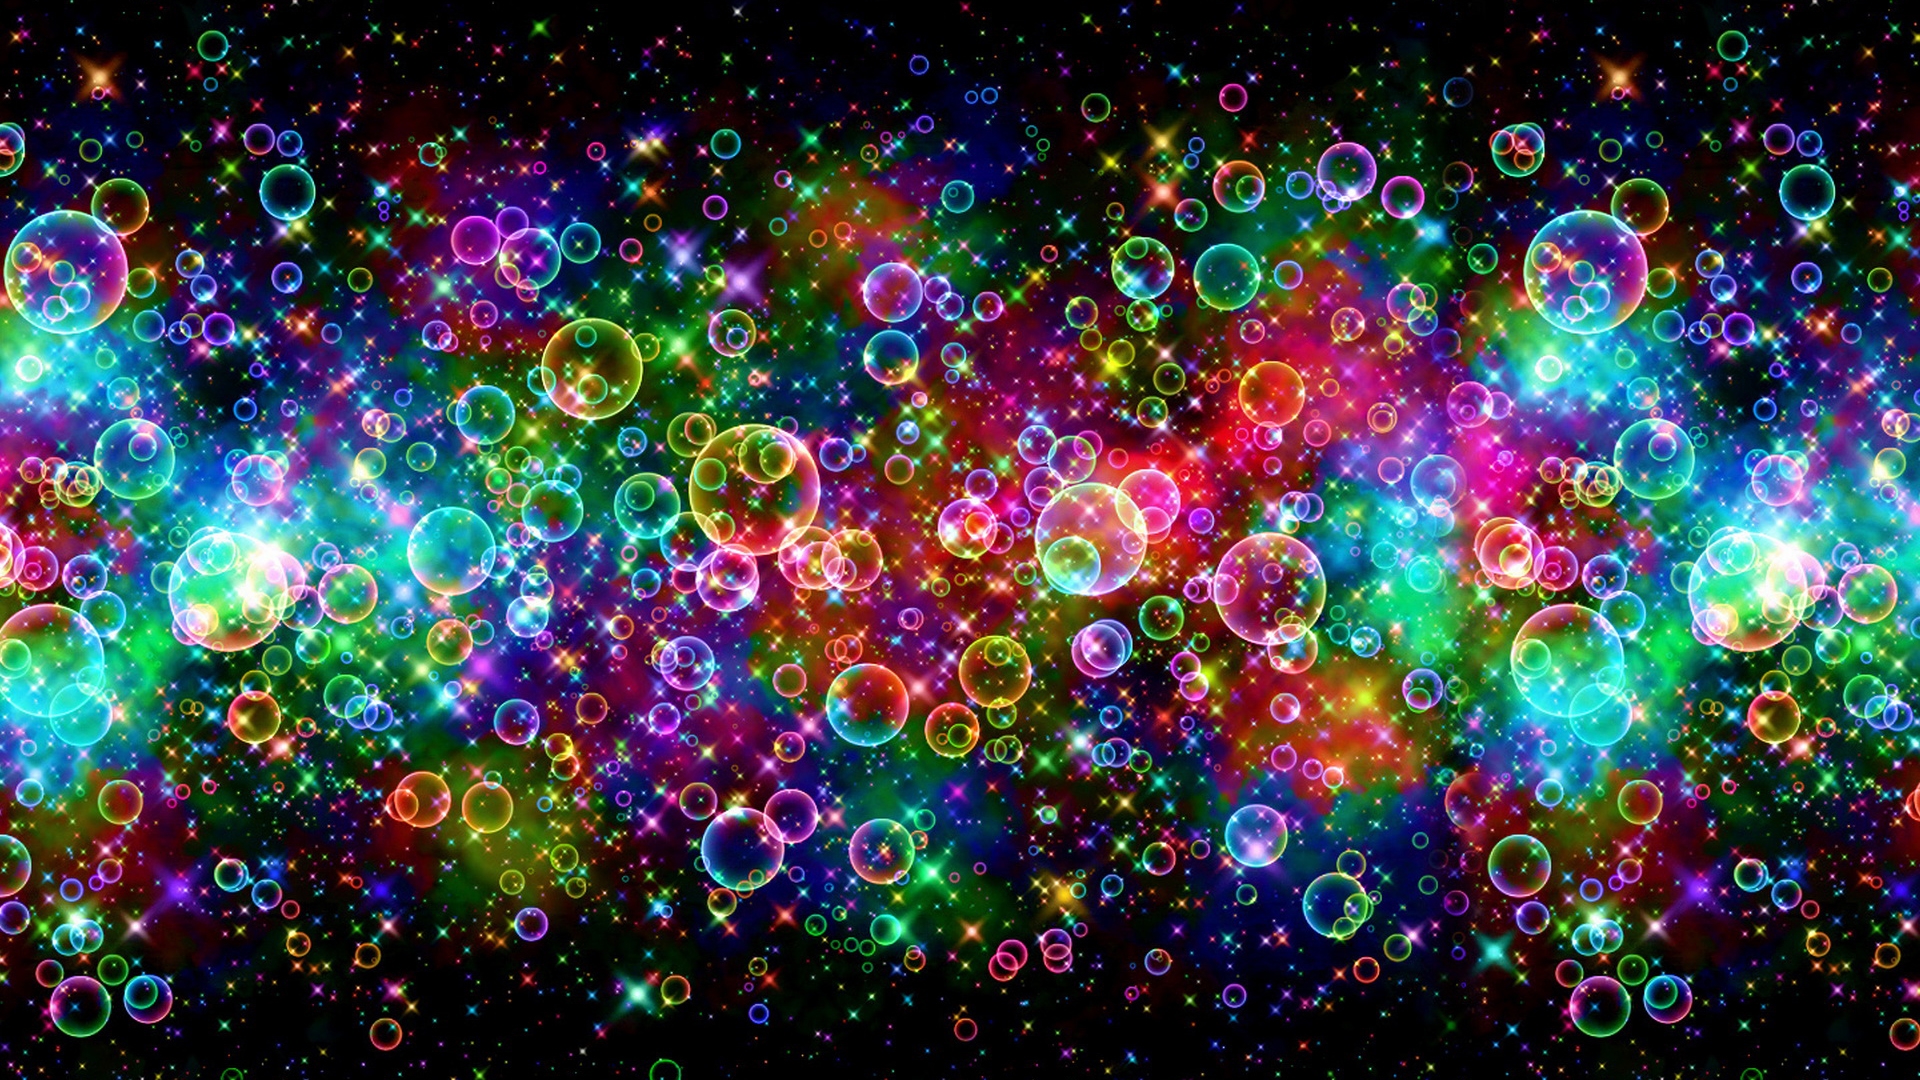 Colorful Bubbles 3D Wallpaper   HQ Free Wallpapers download 100 high